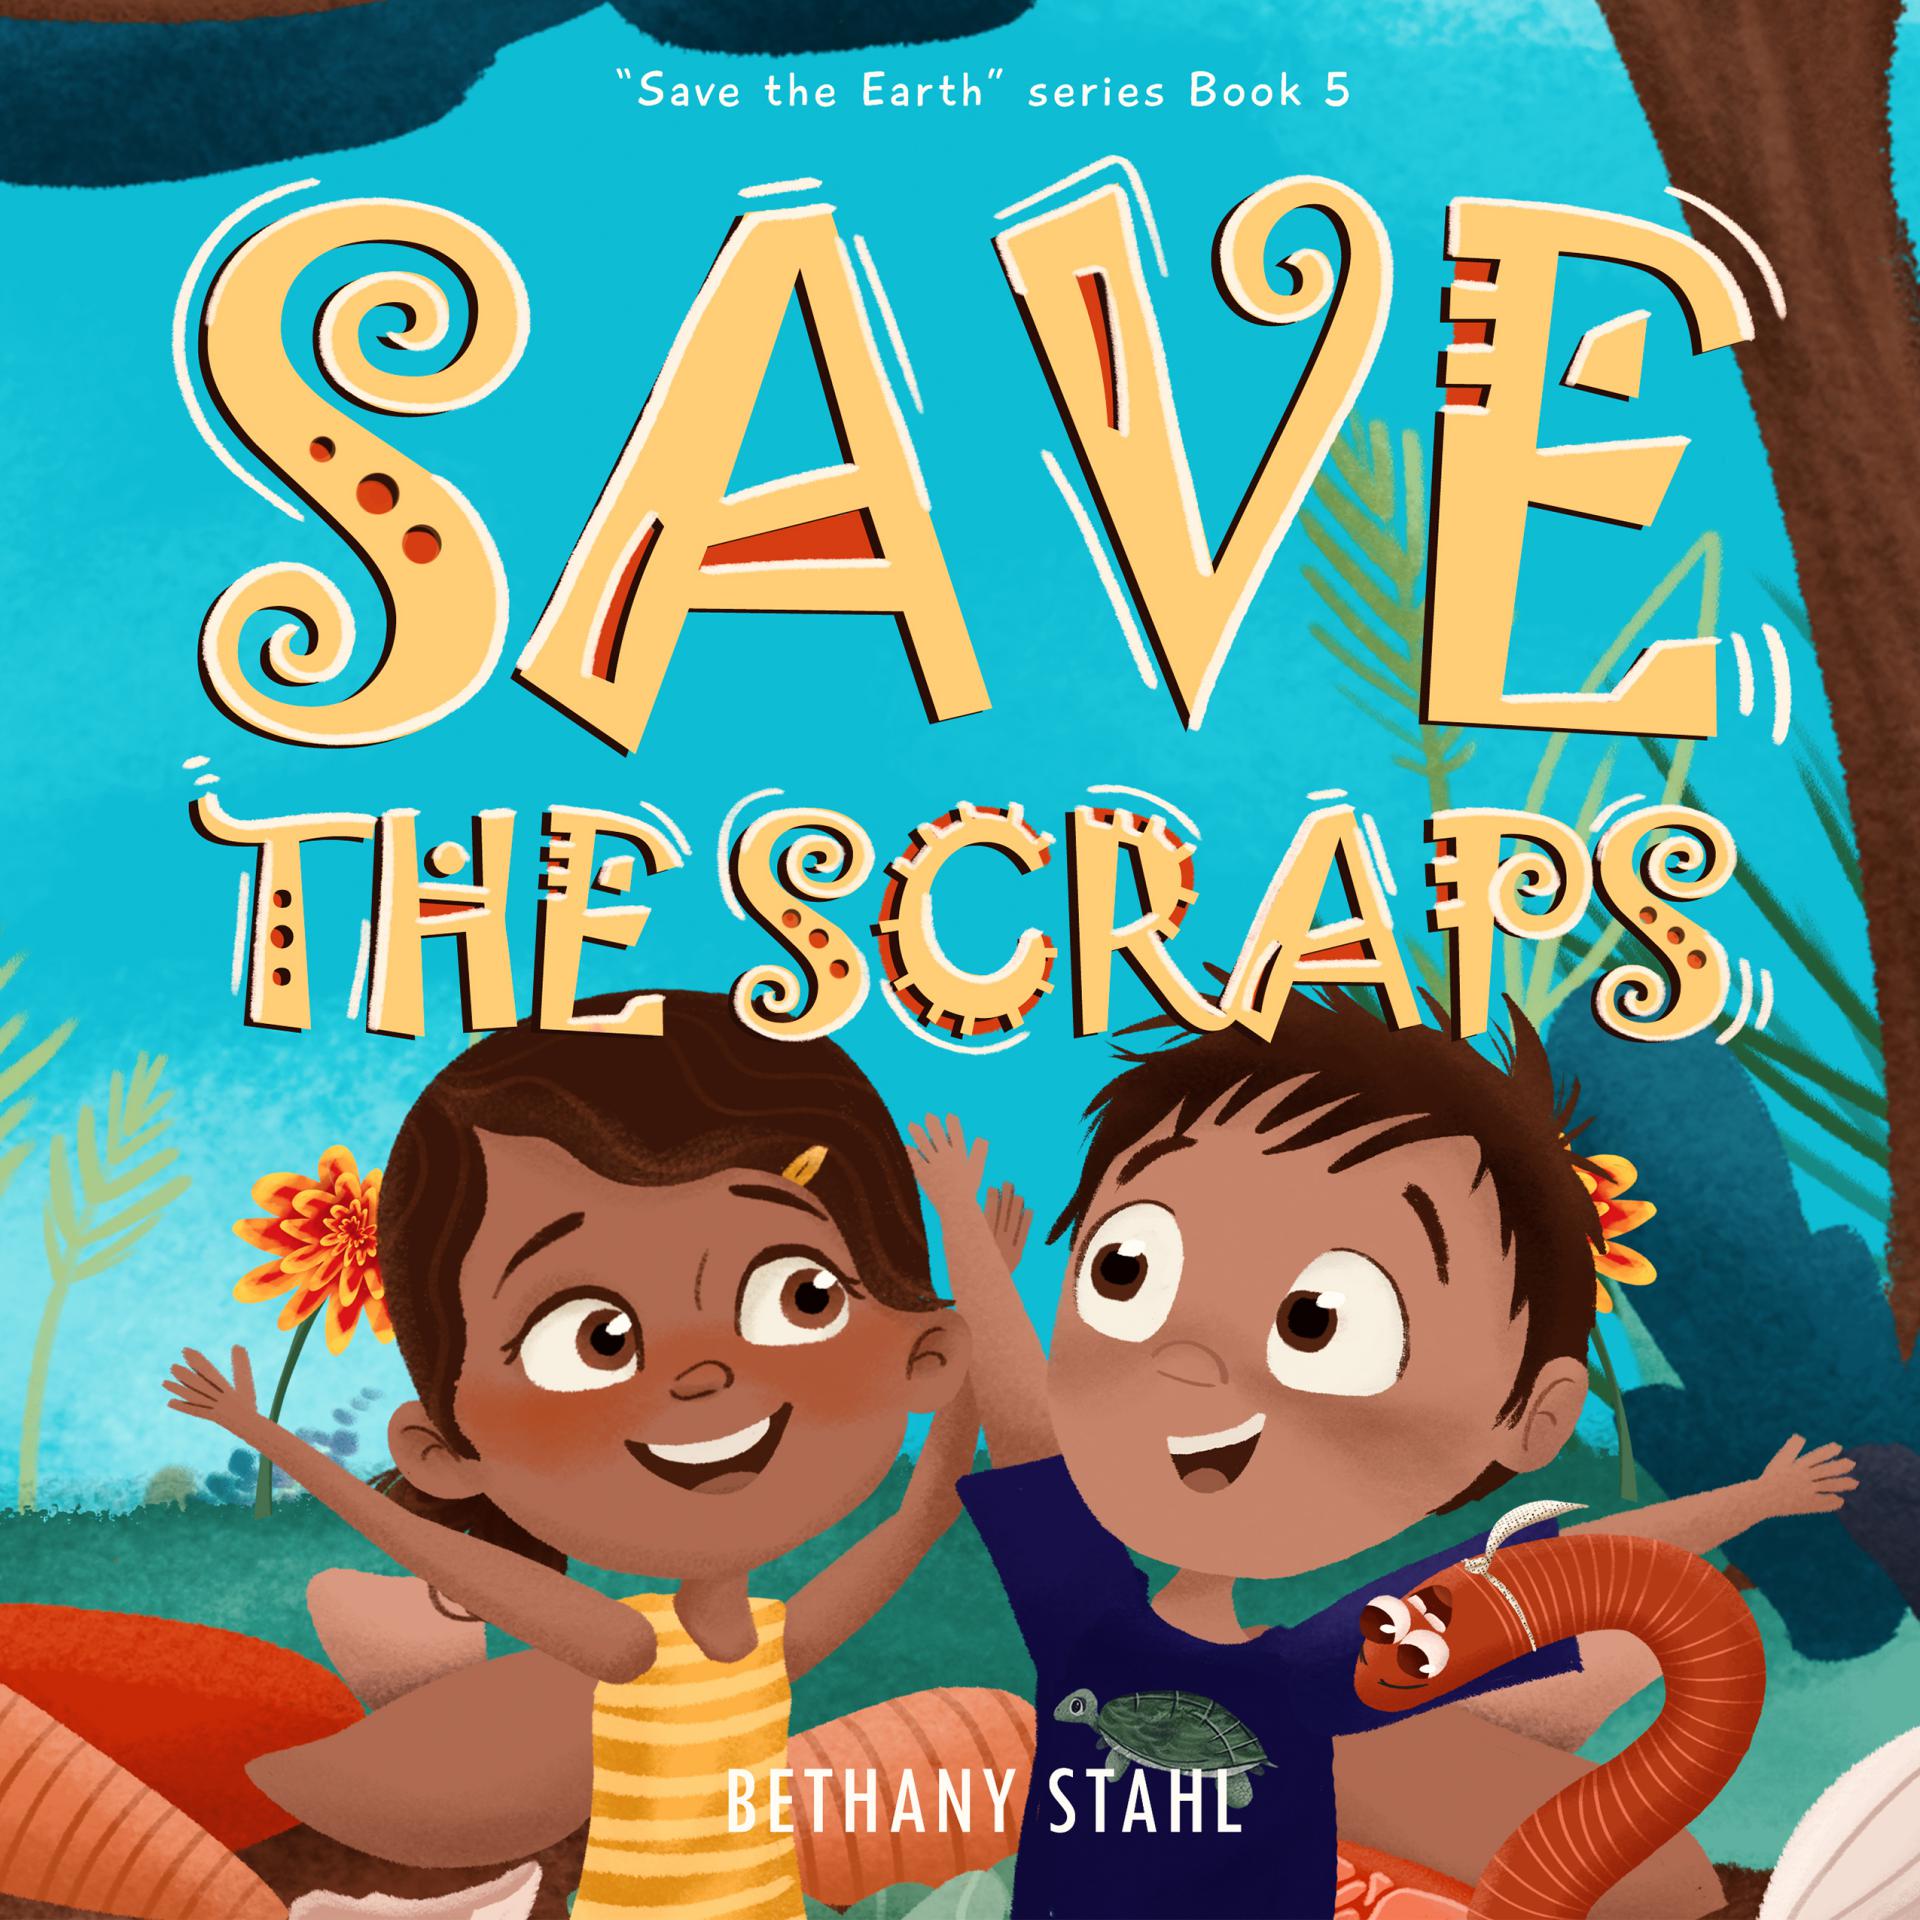 FREE: Save the Scraps by Bethany Stahl